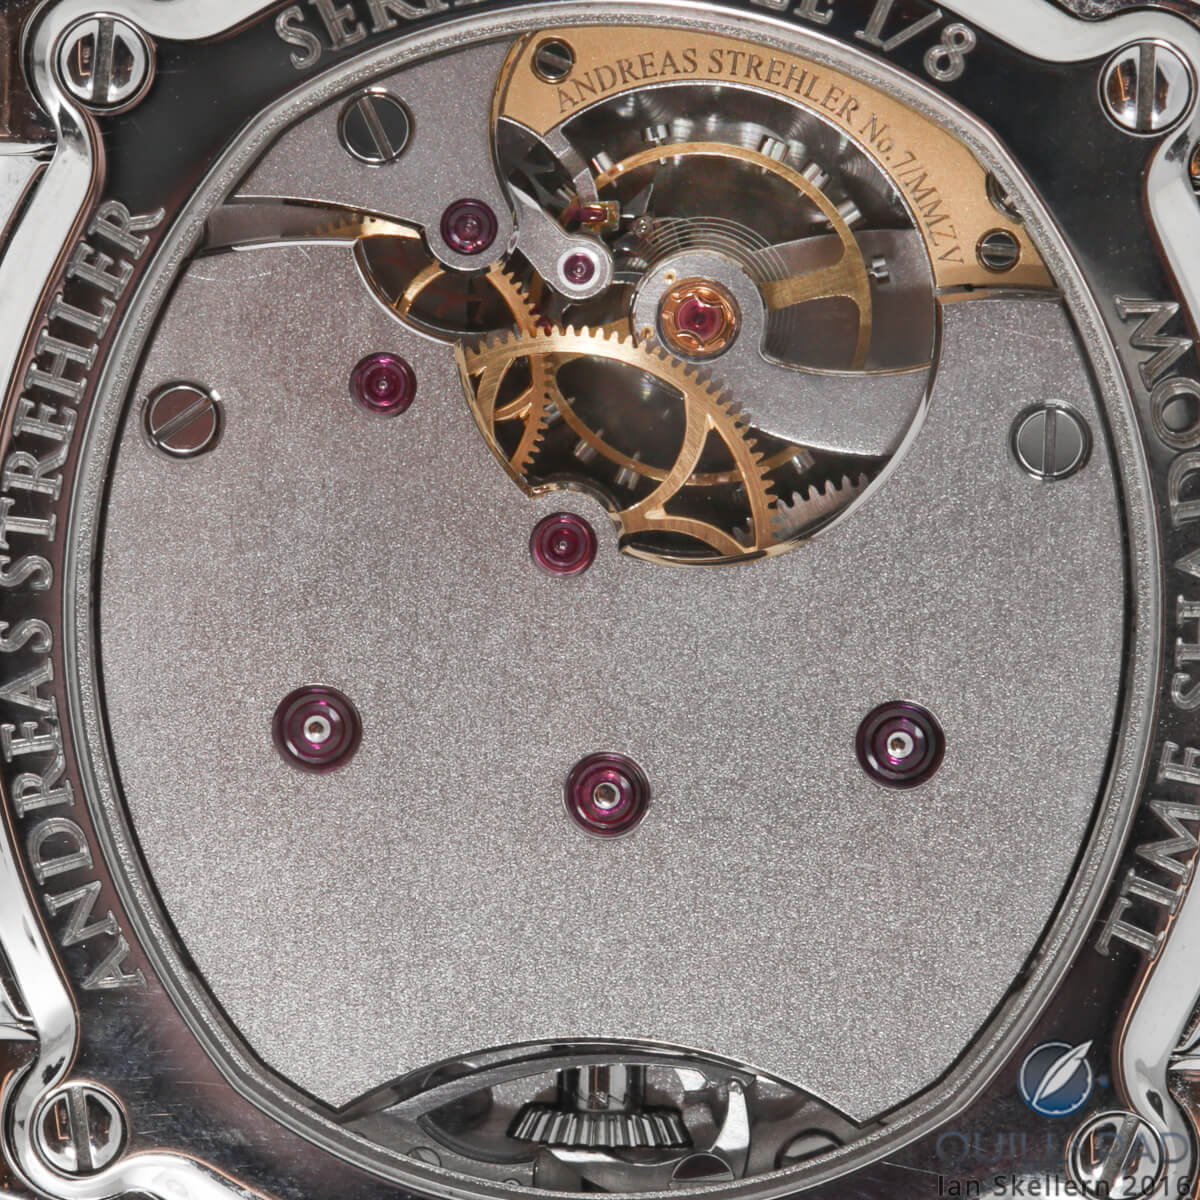 Back of the Andreas Strehler Time Shadow with conical winding gear visible at the bottom